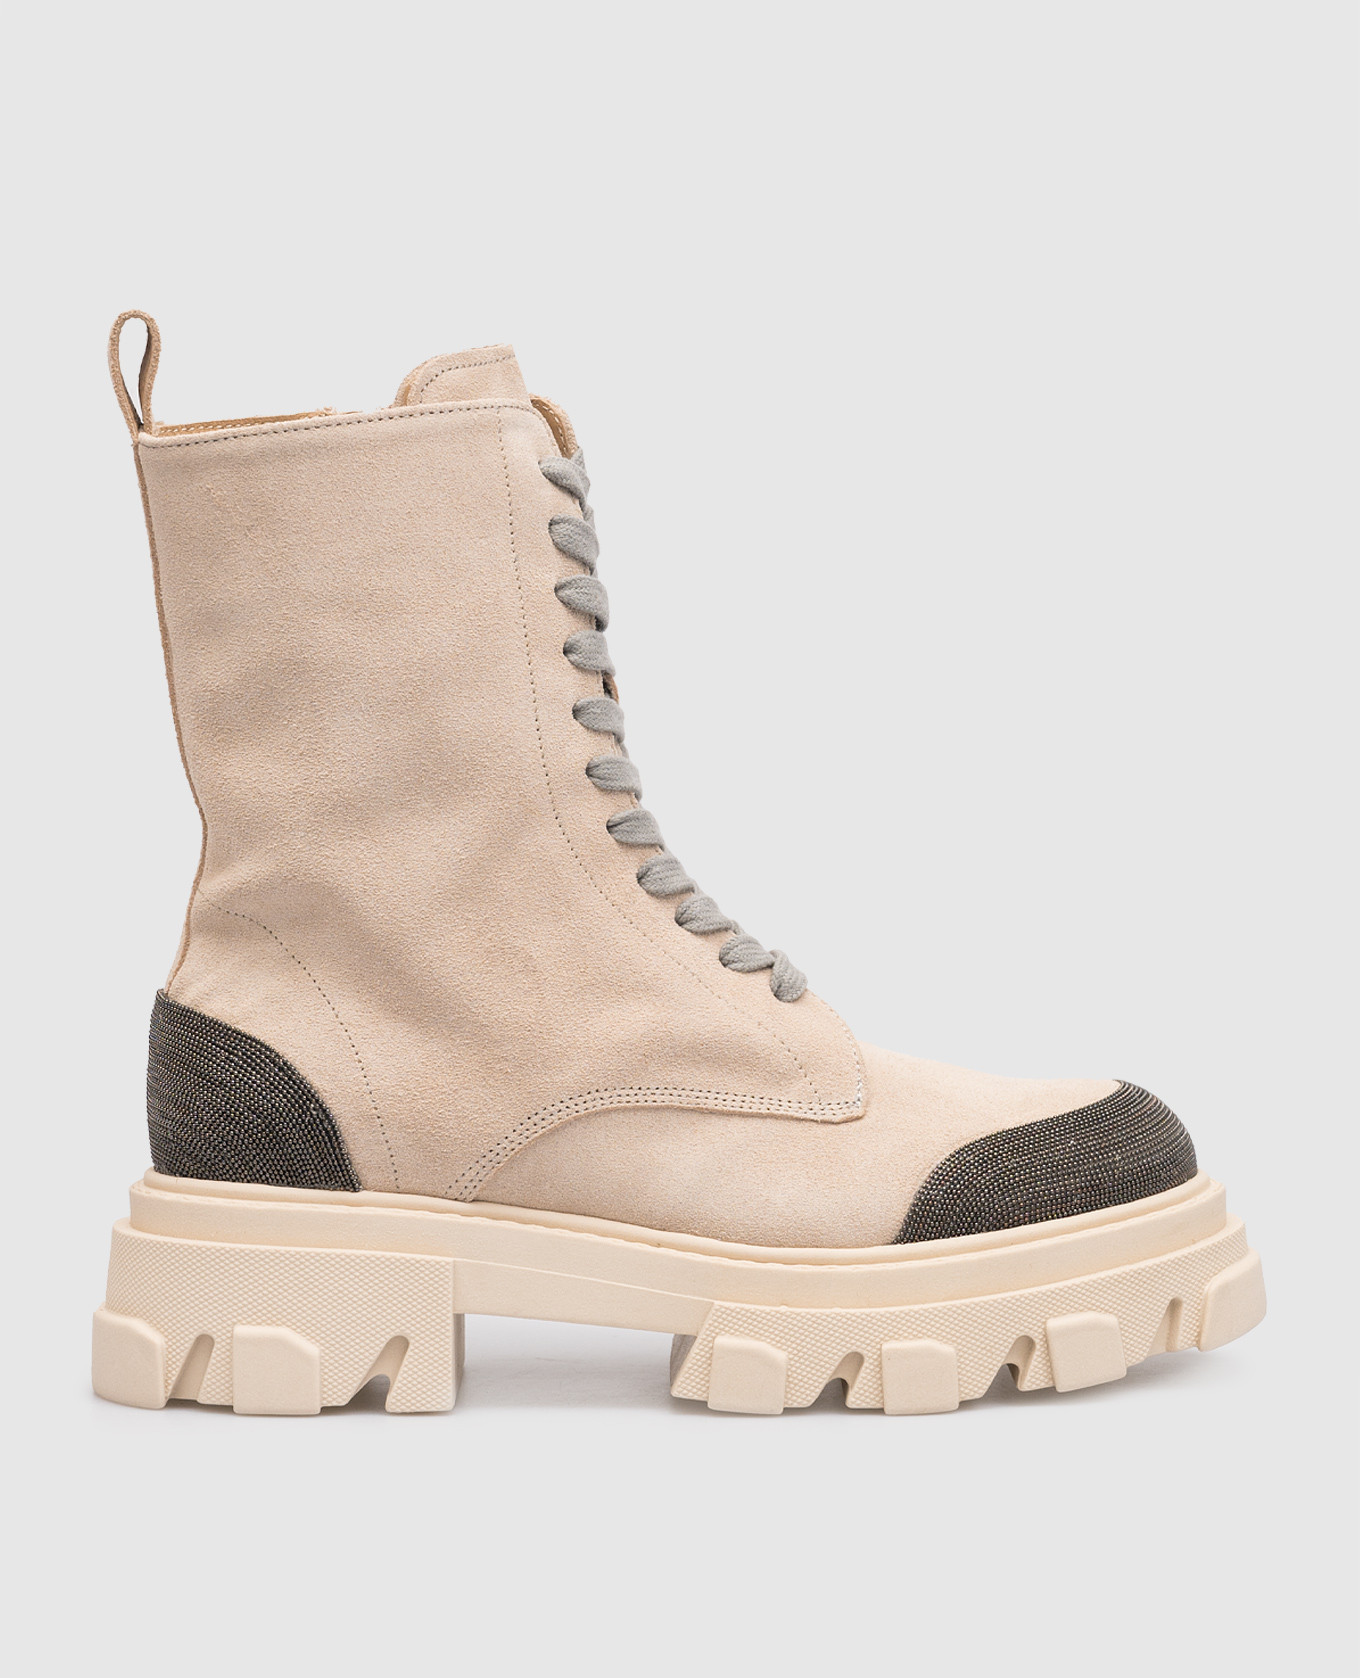 Beige suede boots with monil chain